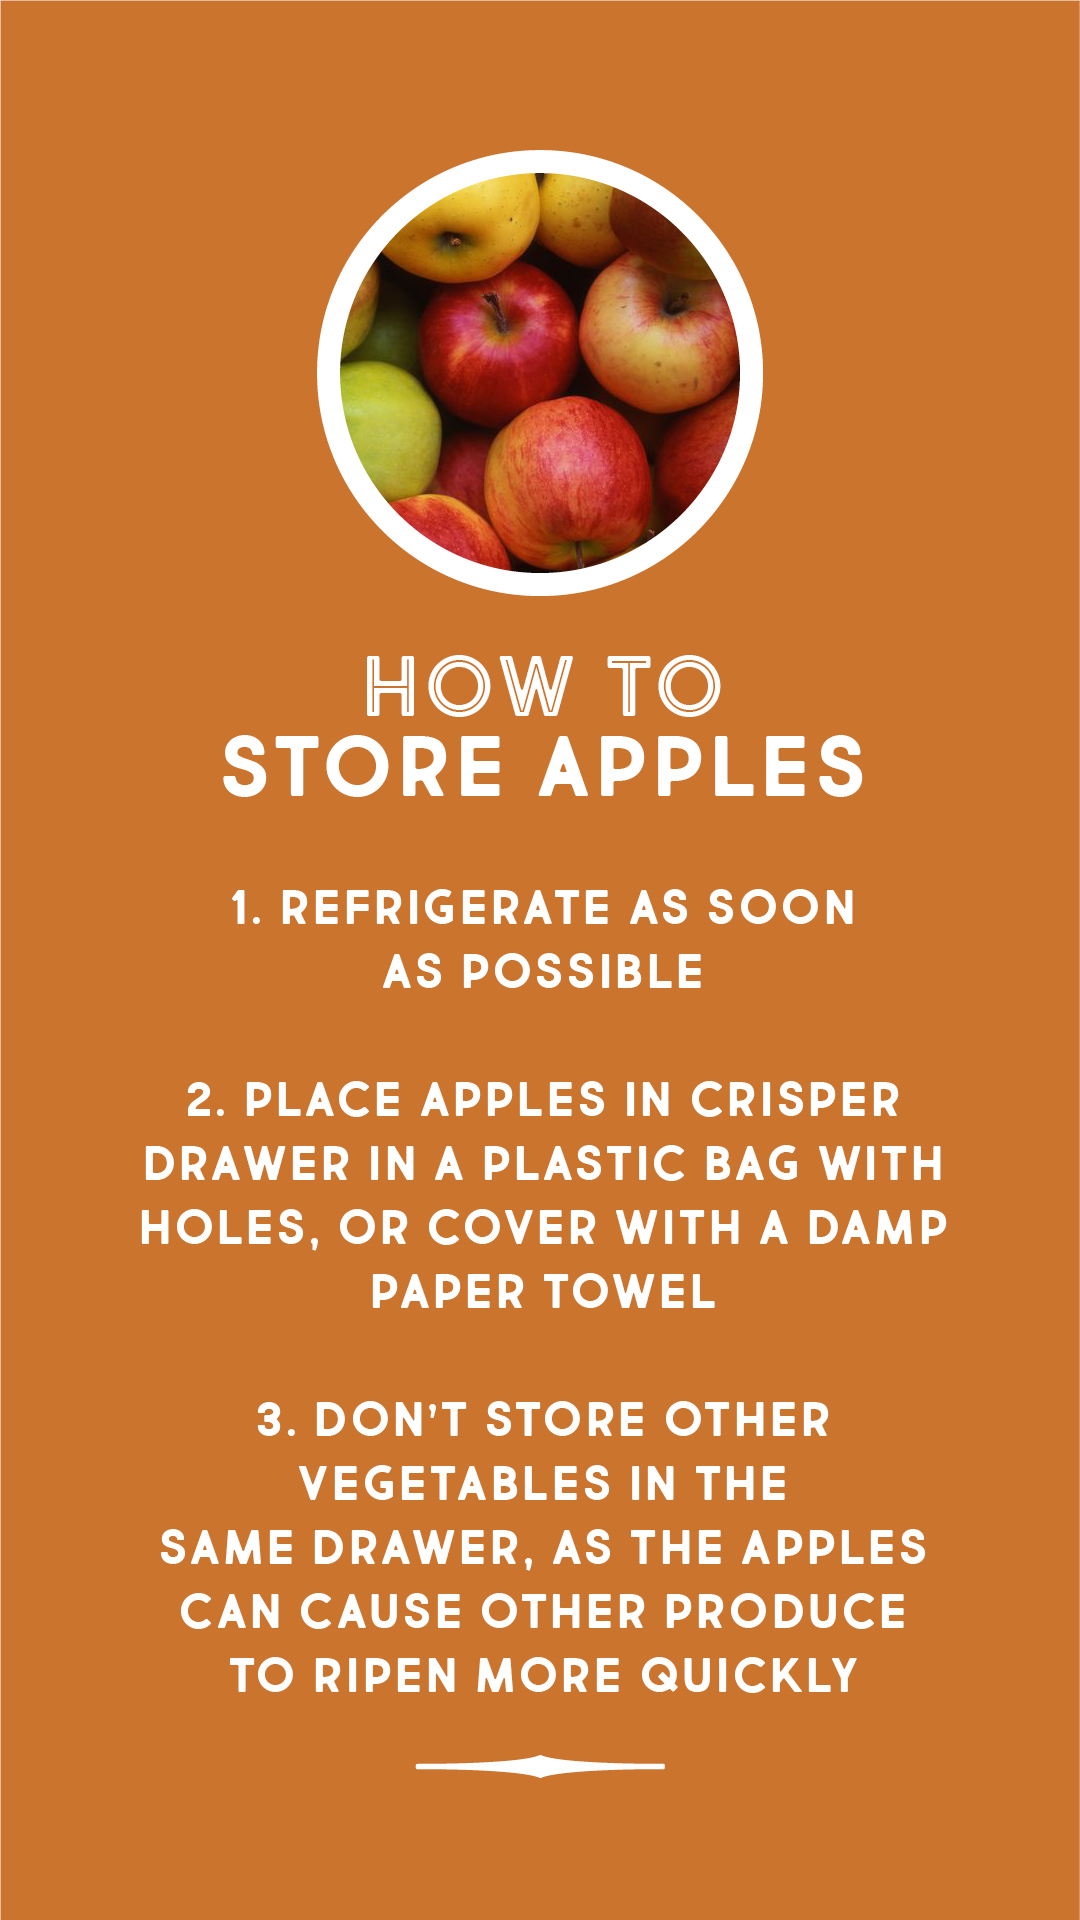 How to store apples